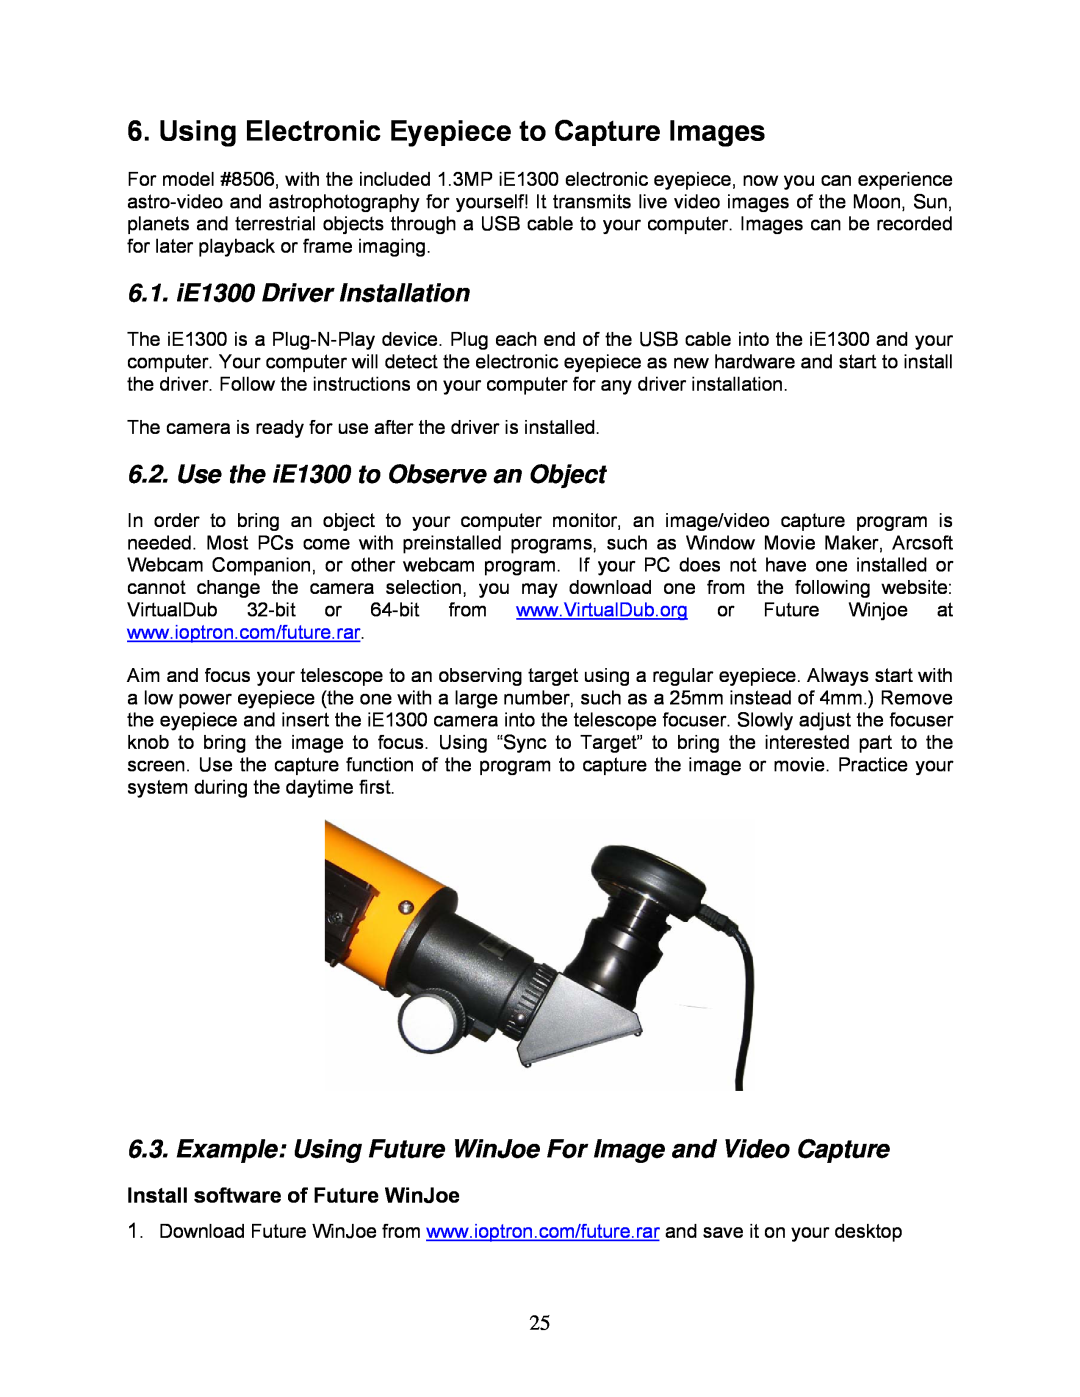 iOptron 8507, 8506 instruction manual Using Electronic Eyepiece to Capture Images, 6.1. iE1300 Driver Installation 